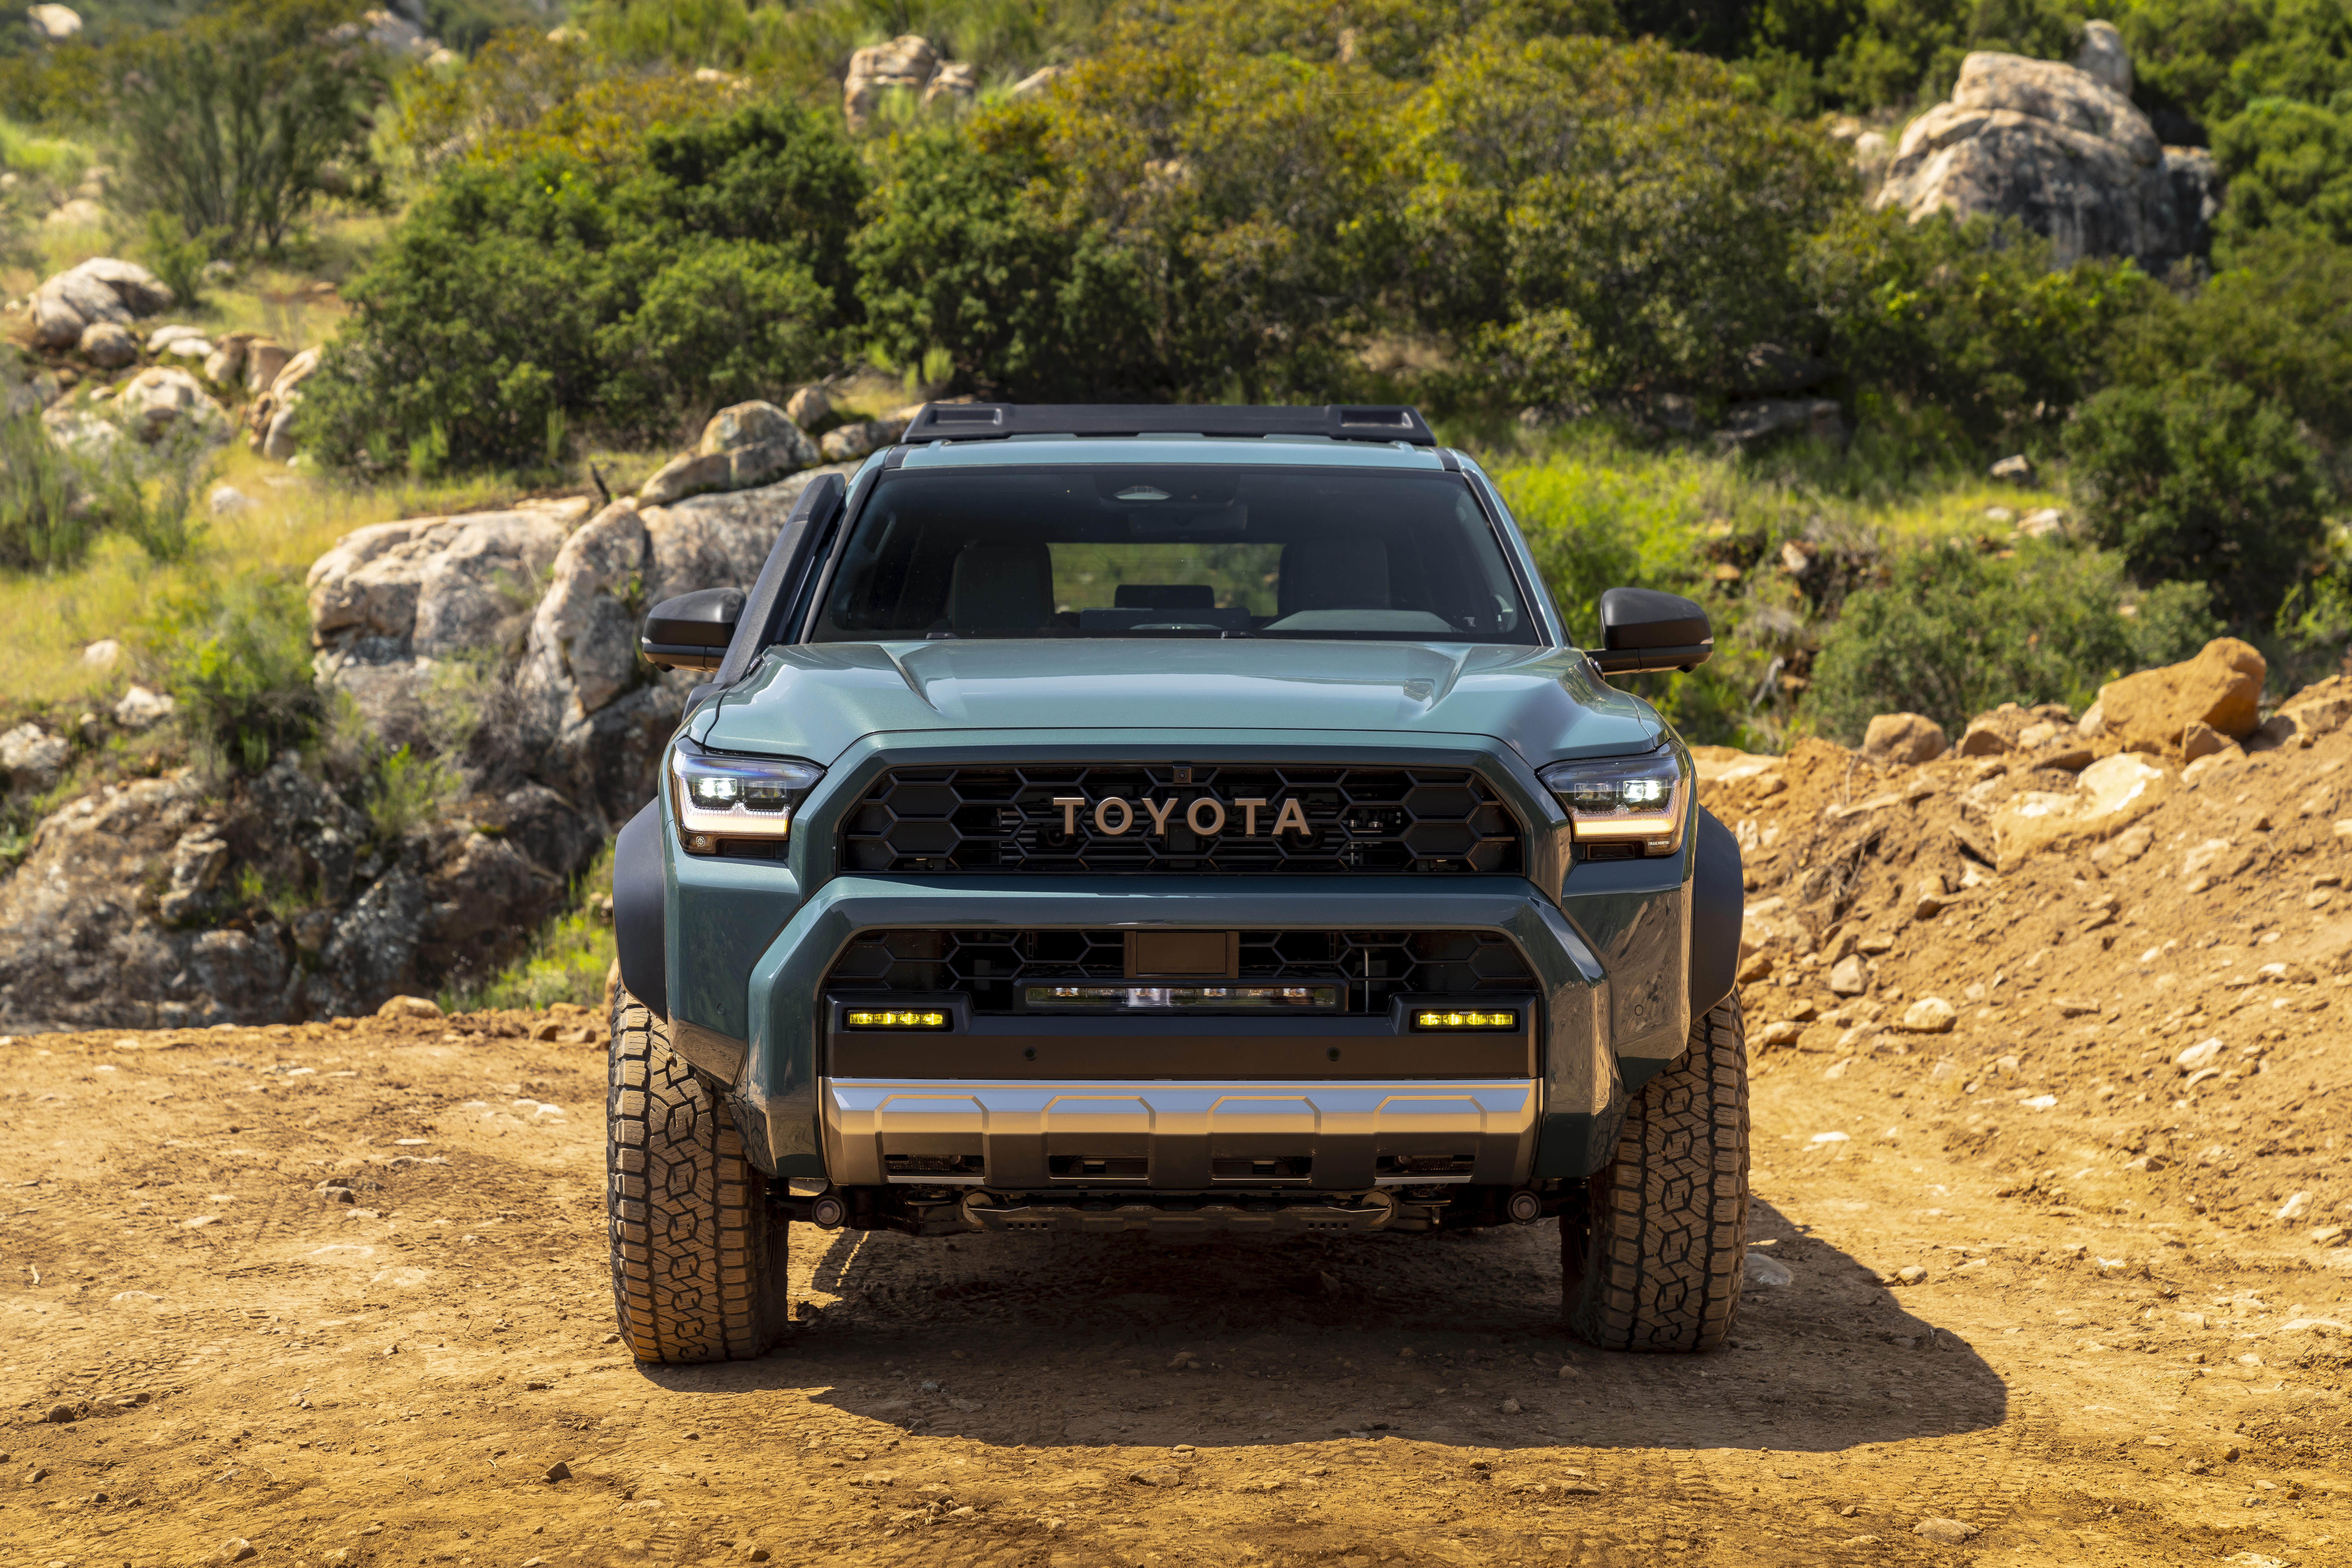 The new off-road SUV will have a hybrid drive